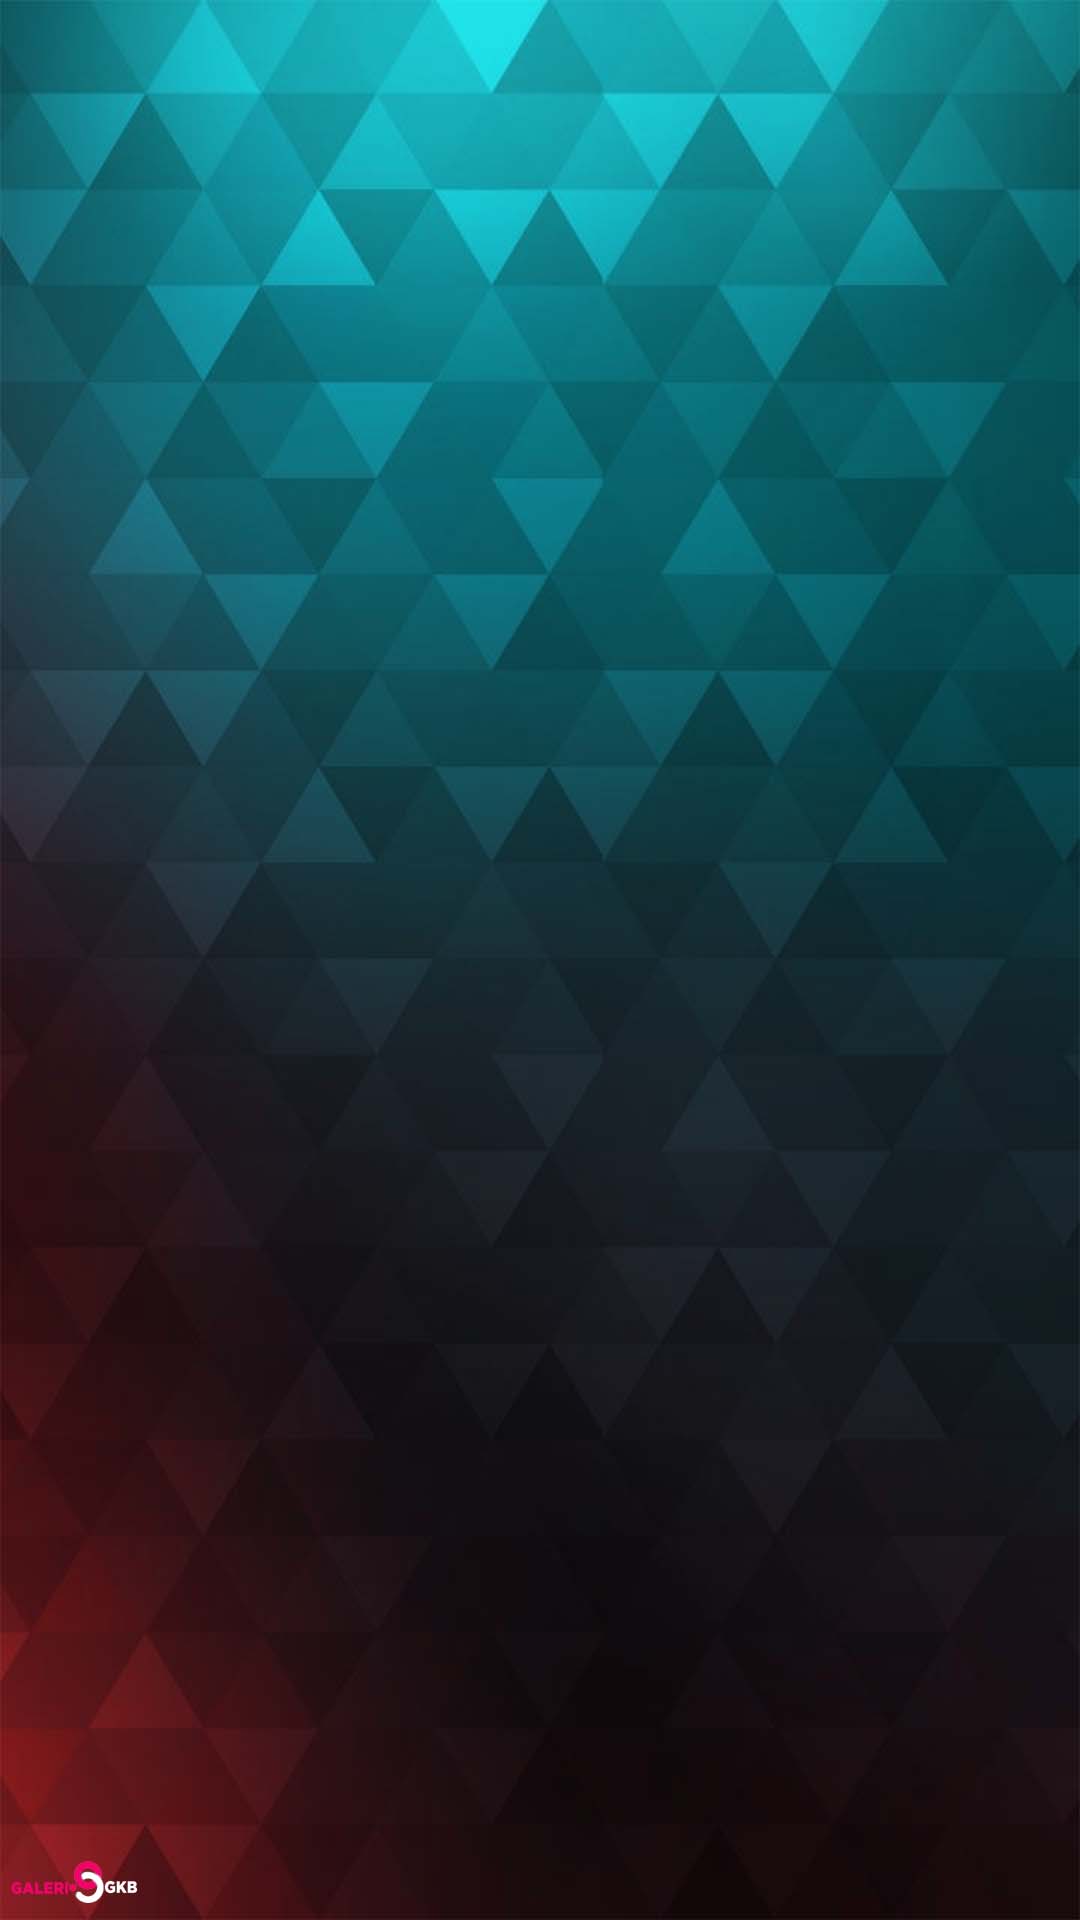 Abstract Wallpaper For Android Phone